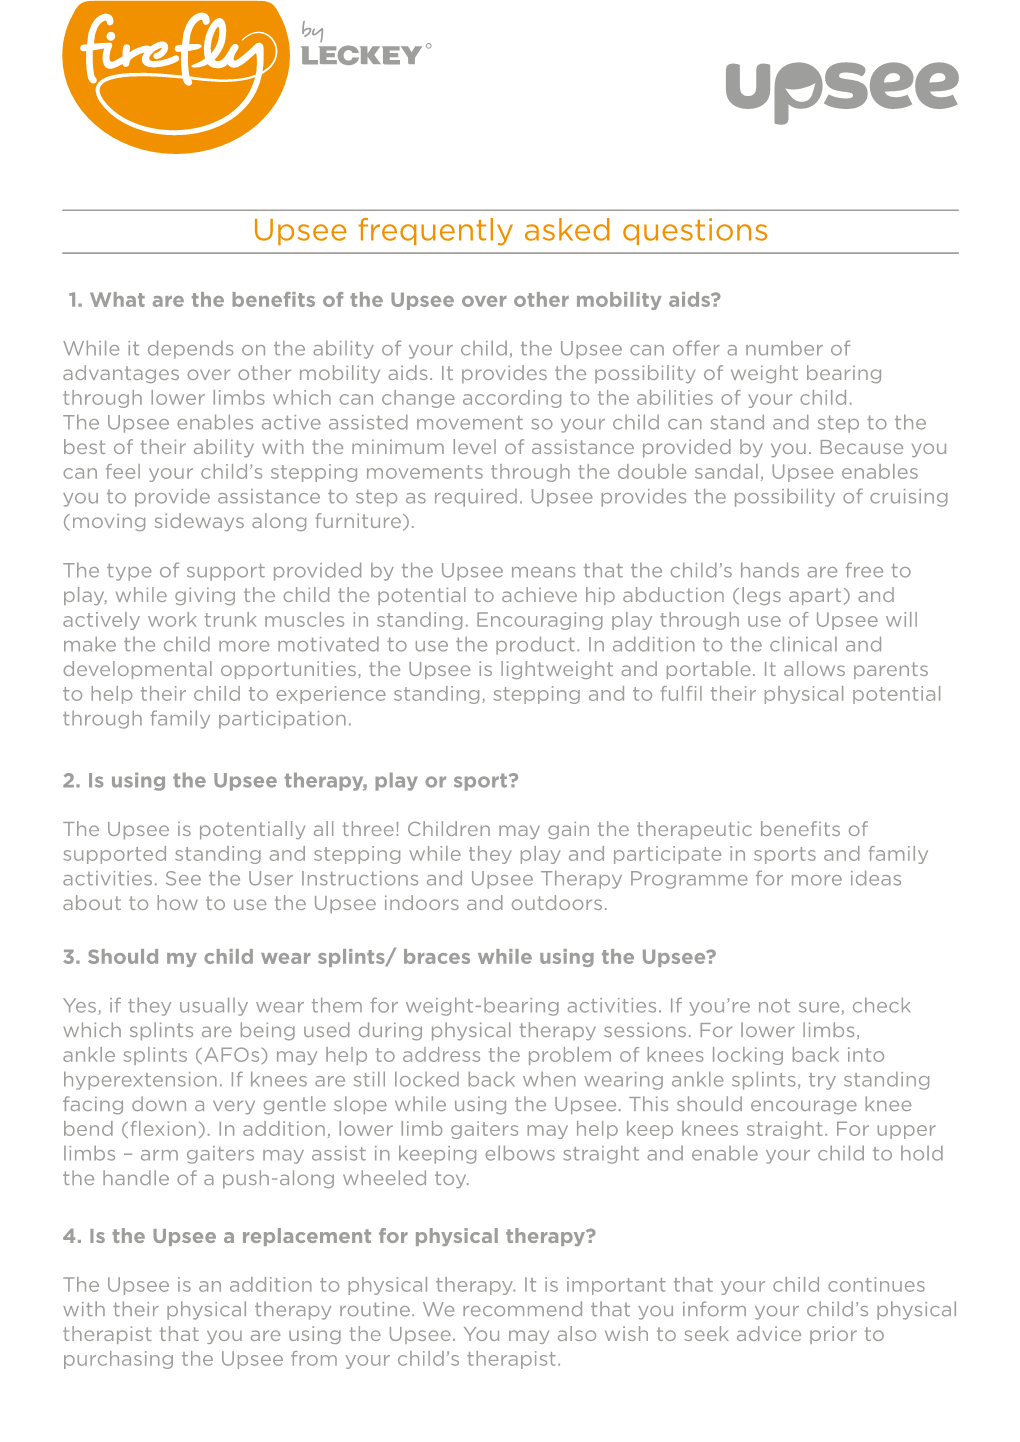 Upsee Frequently Asked Questions